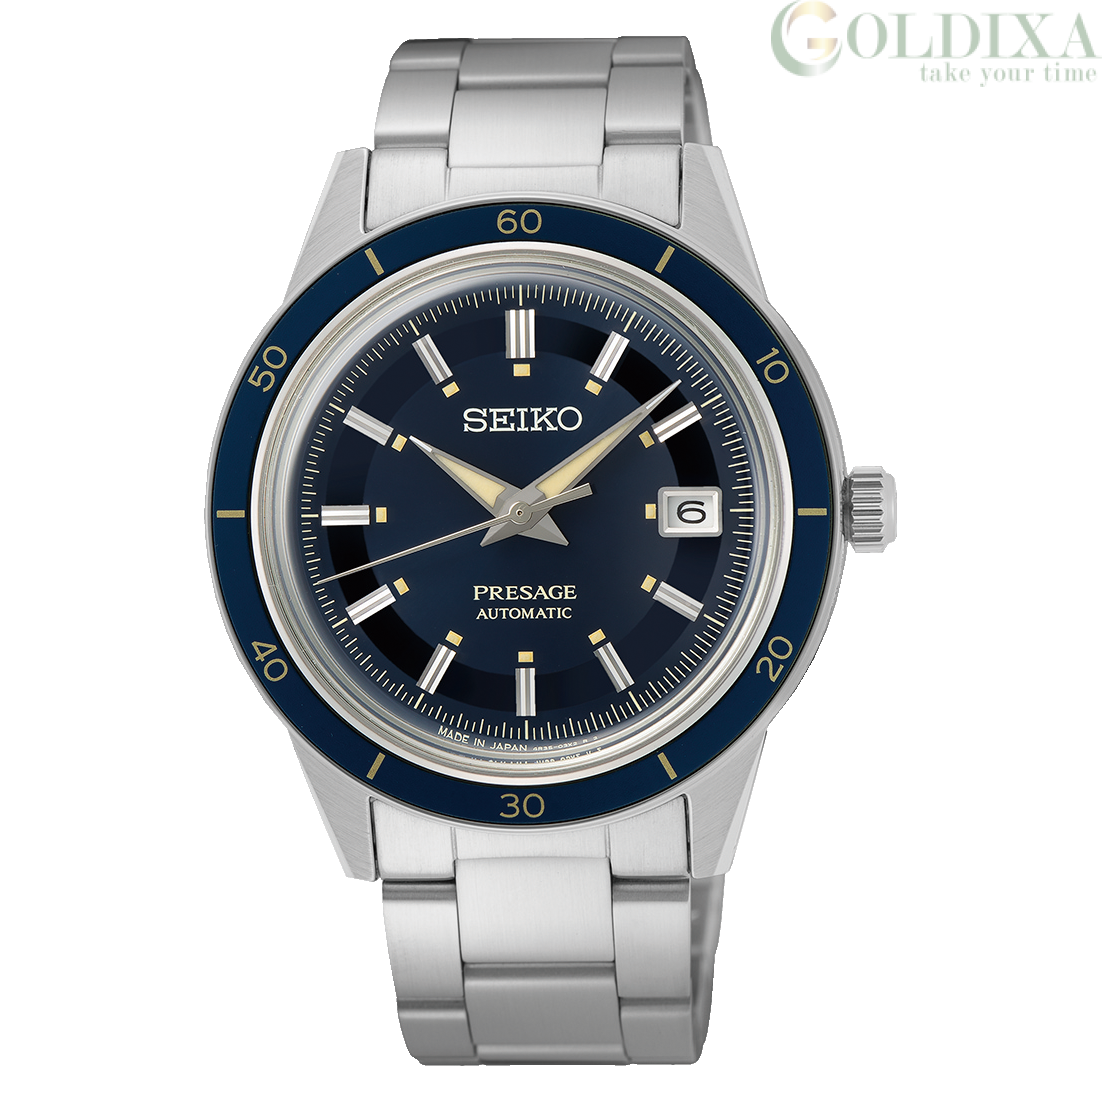 Watches: Seiko Presage automatic blue SRPG05J1 steel manual winding watch